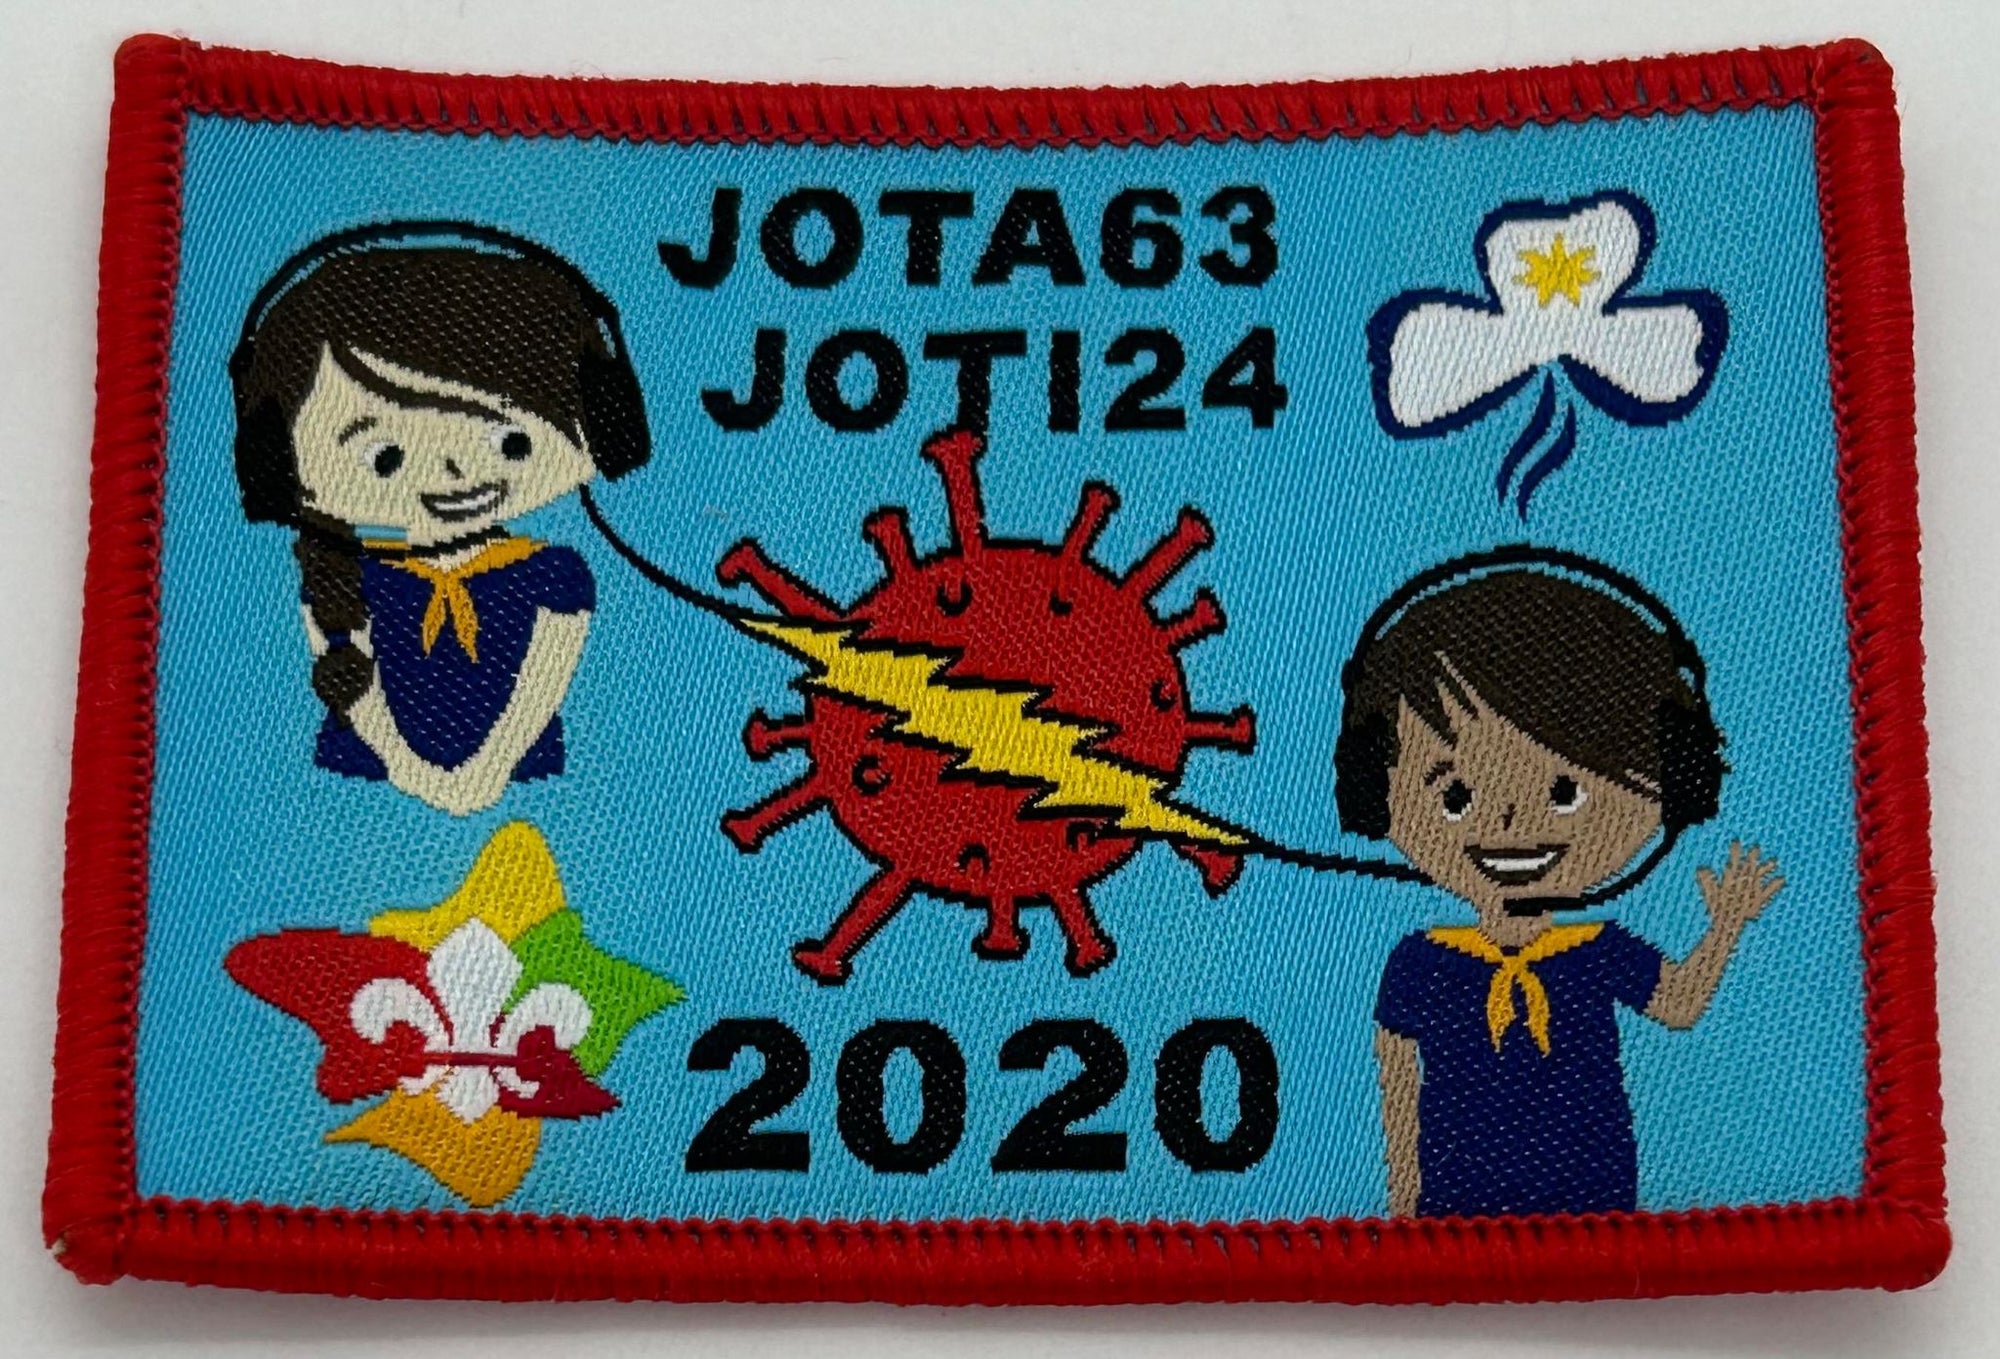 a rectangular blue badge bound in red with two guides communicating over the airwaves